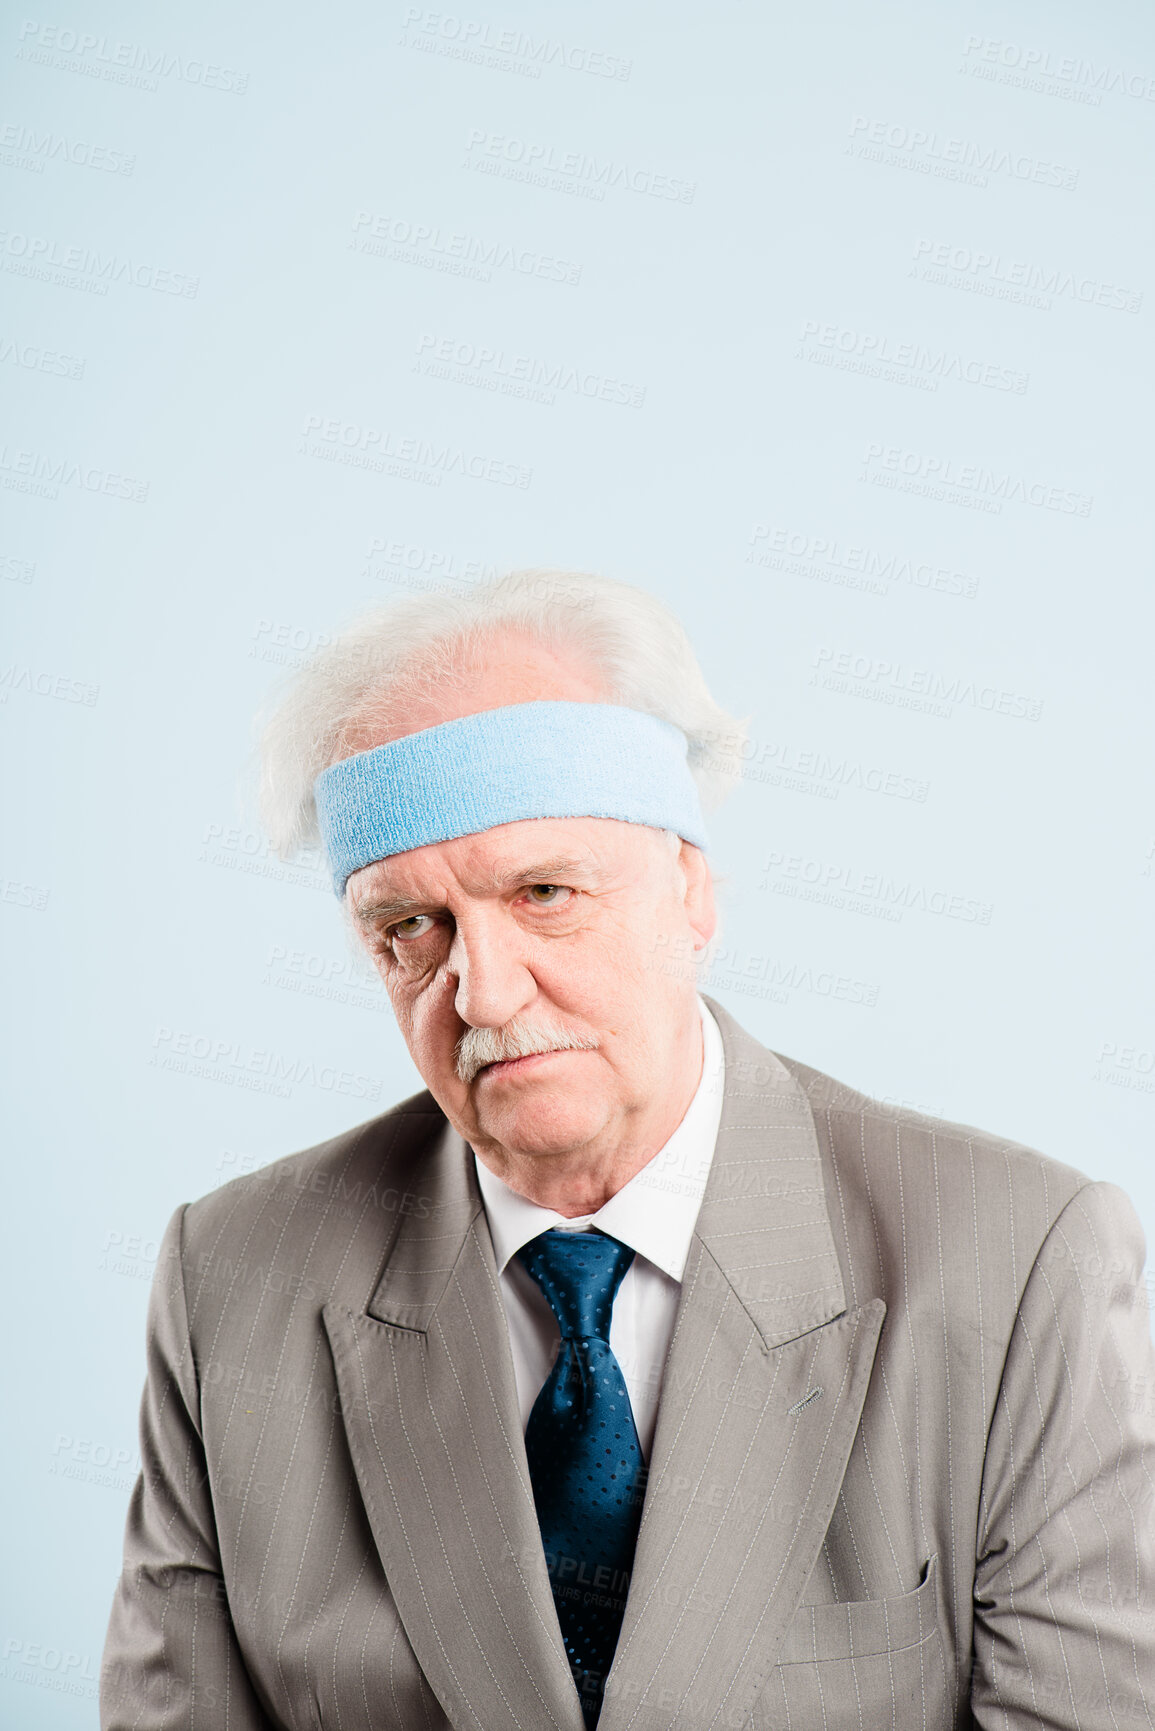 Buy stock photo Shot of a senior man sitting alone in the studio and looking grumpy while wearing a headband